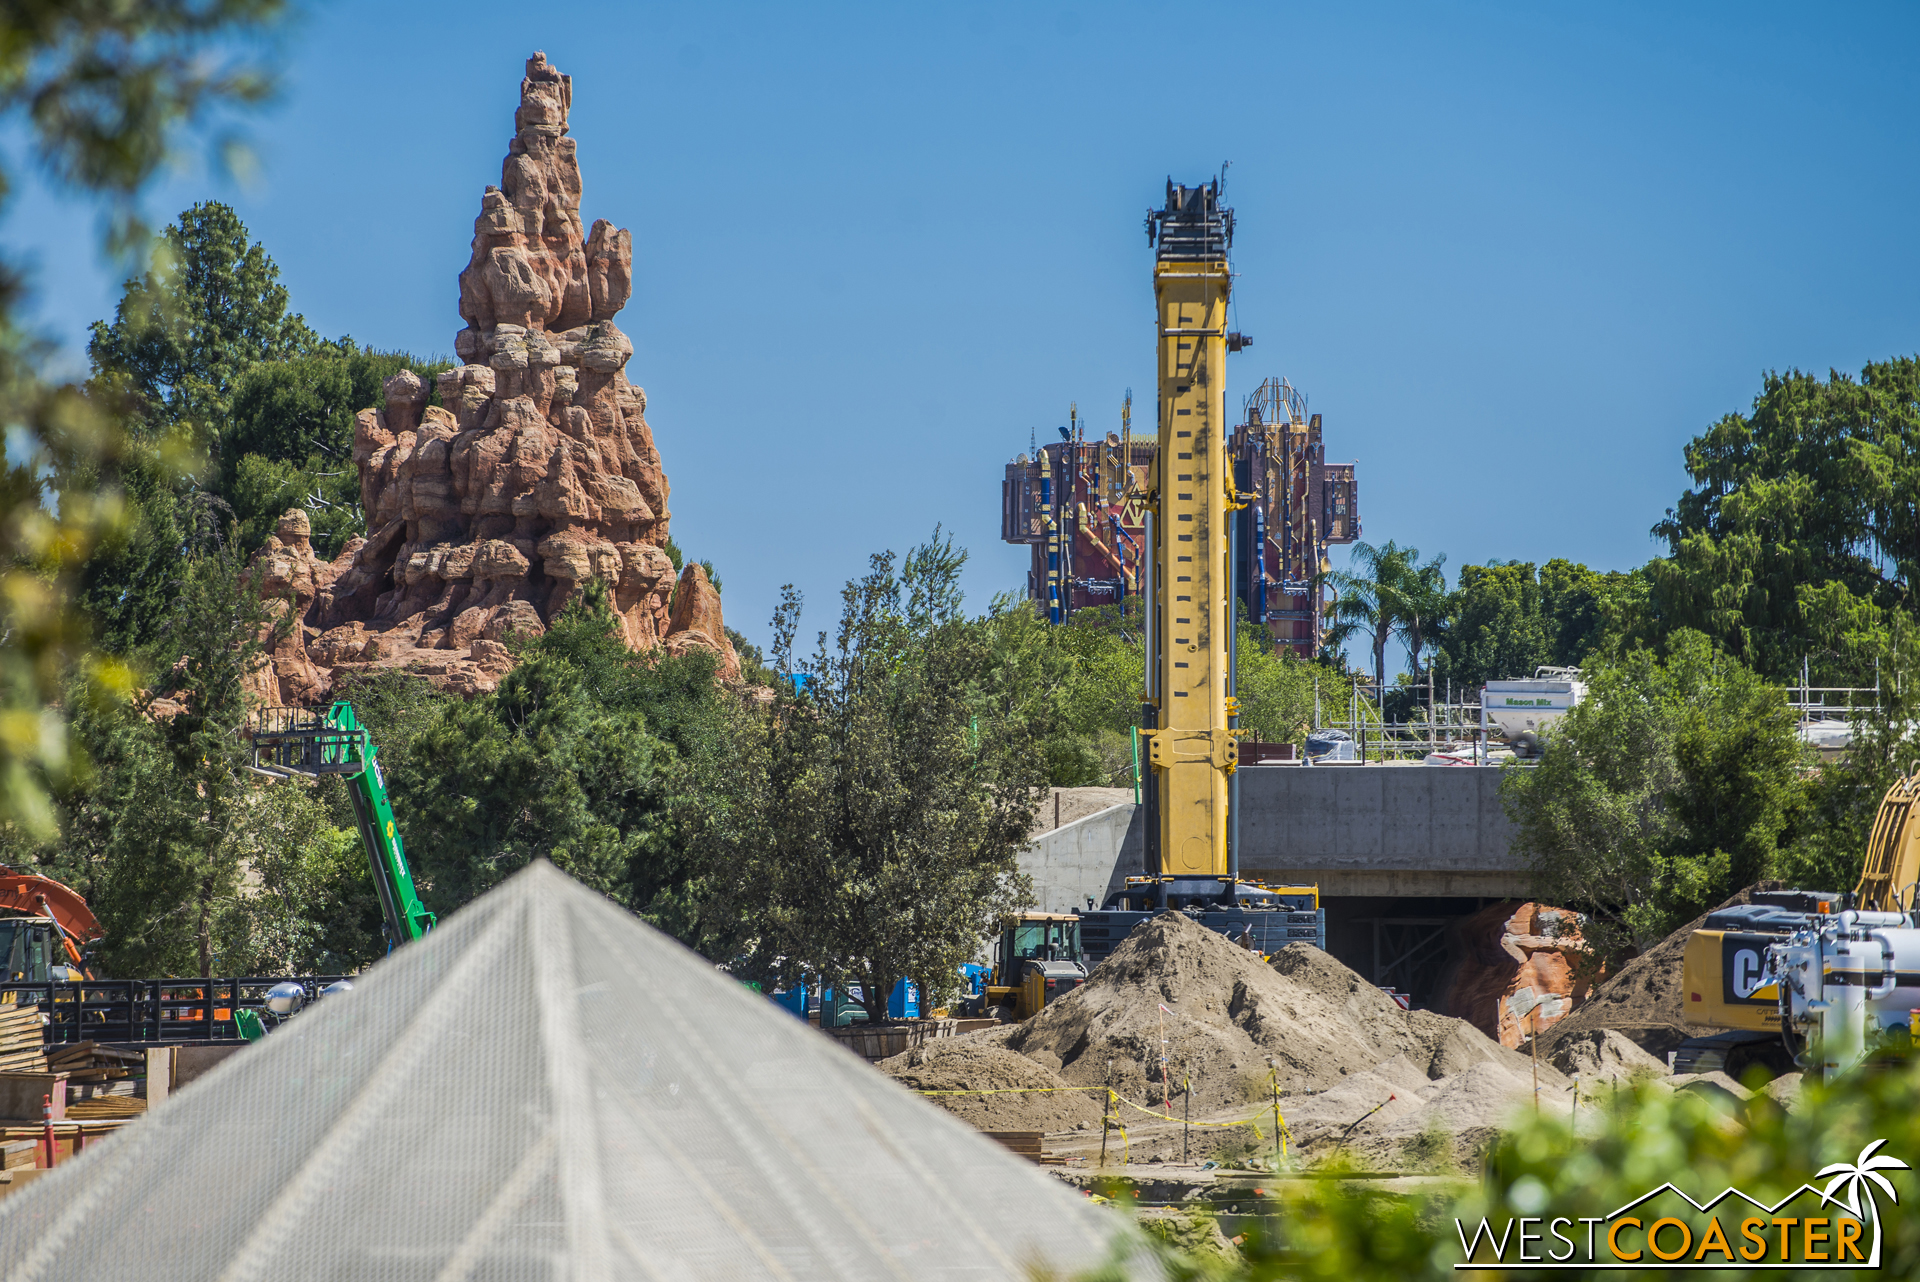  From closer to ground level, we stair toward one of the main entrances to "Star Wars" Land, plus Guardians Tower in the background. 